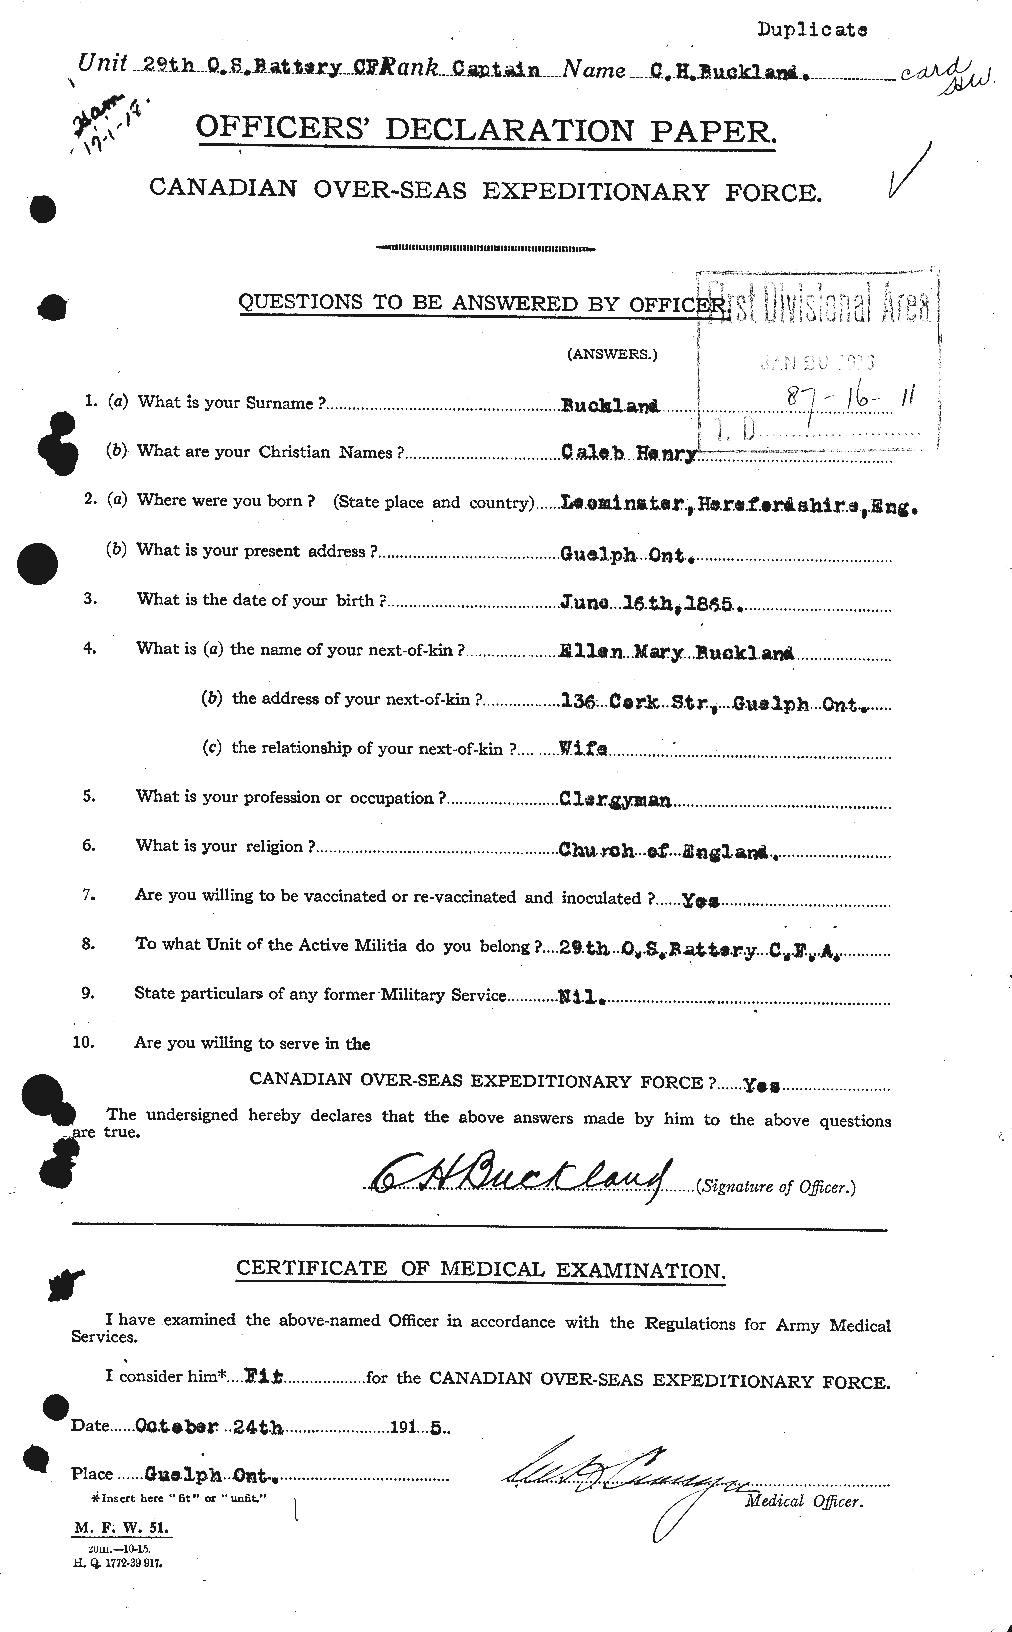 Personnel Records of the First World War - CEF 269483a